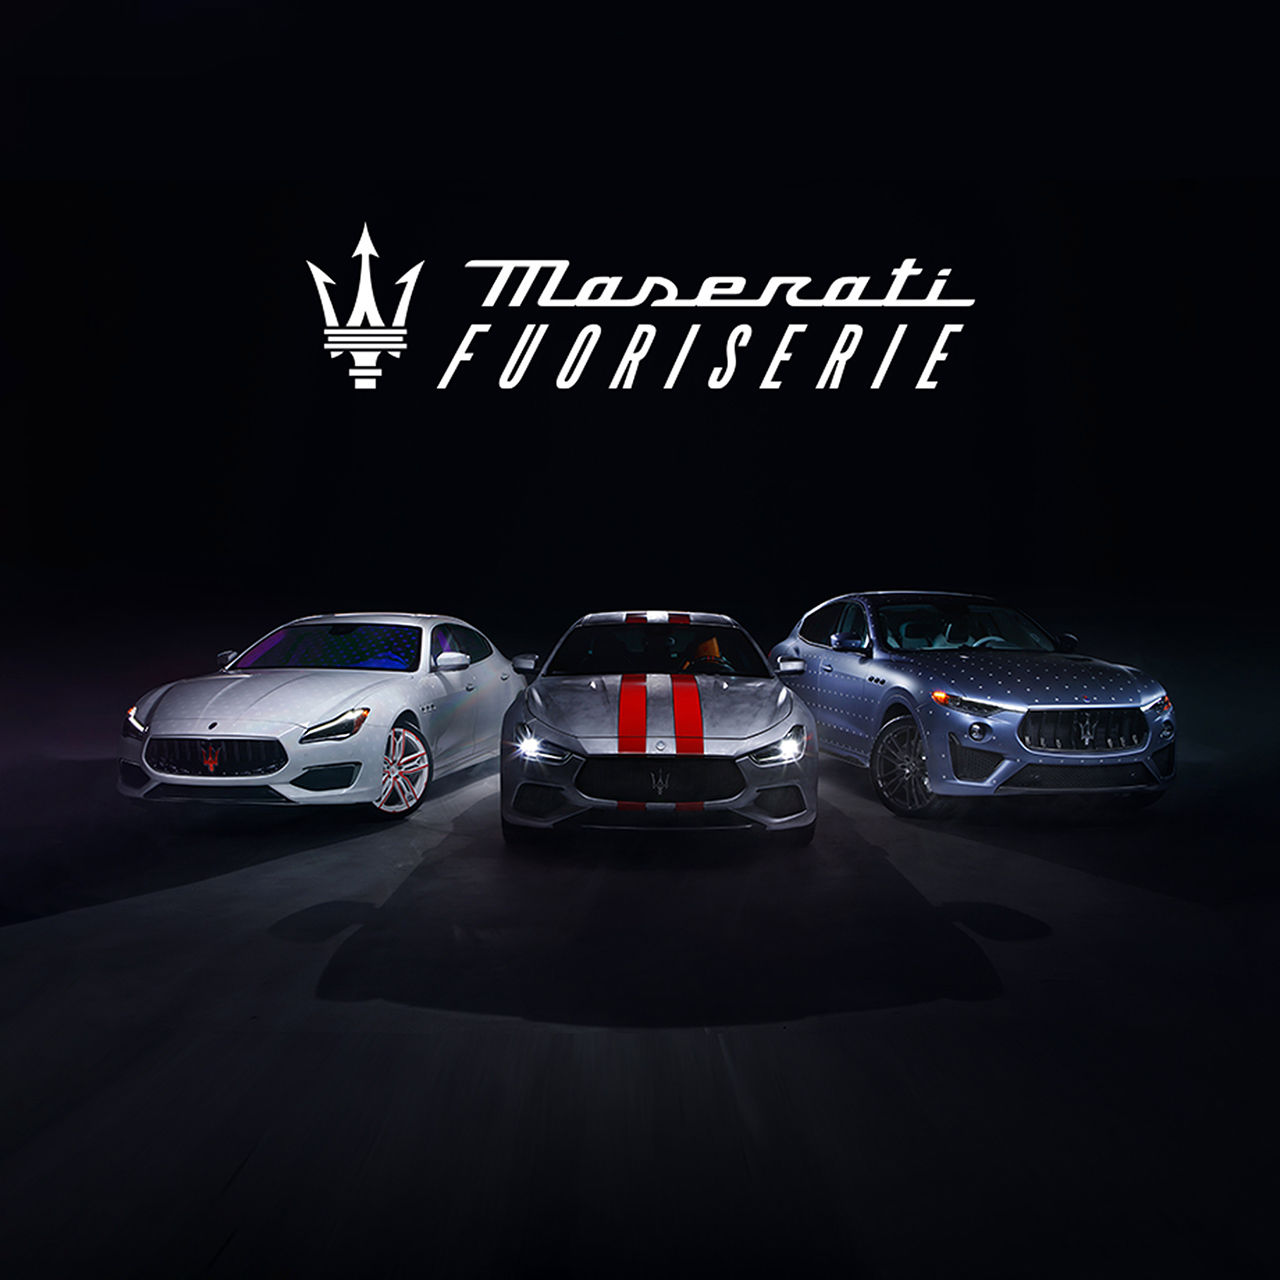 3 Maserati Fuoriserie models lined up next to each other